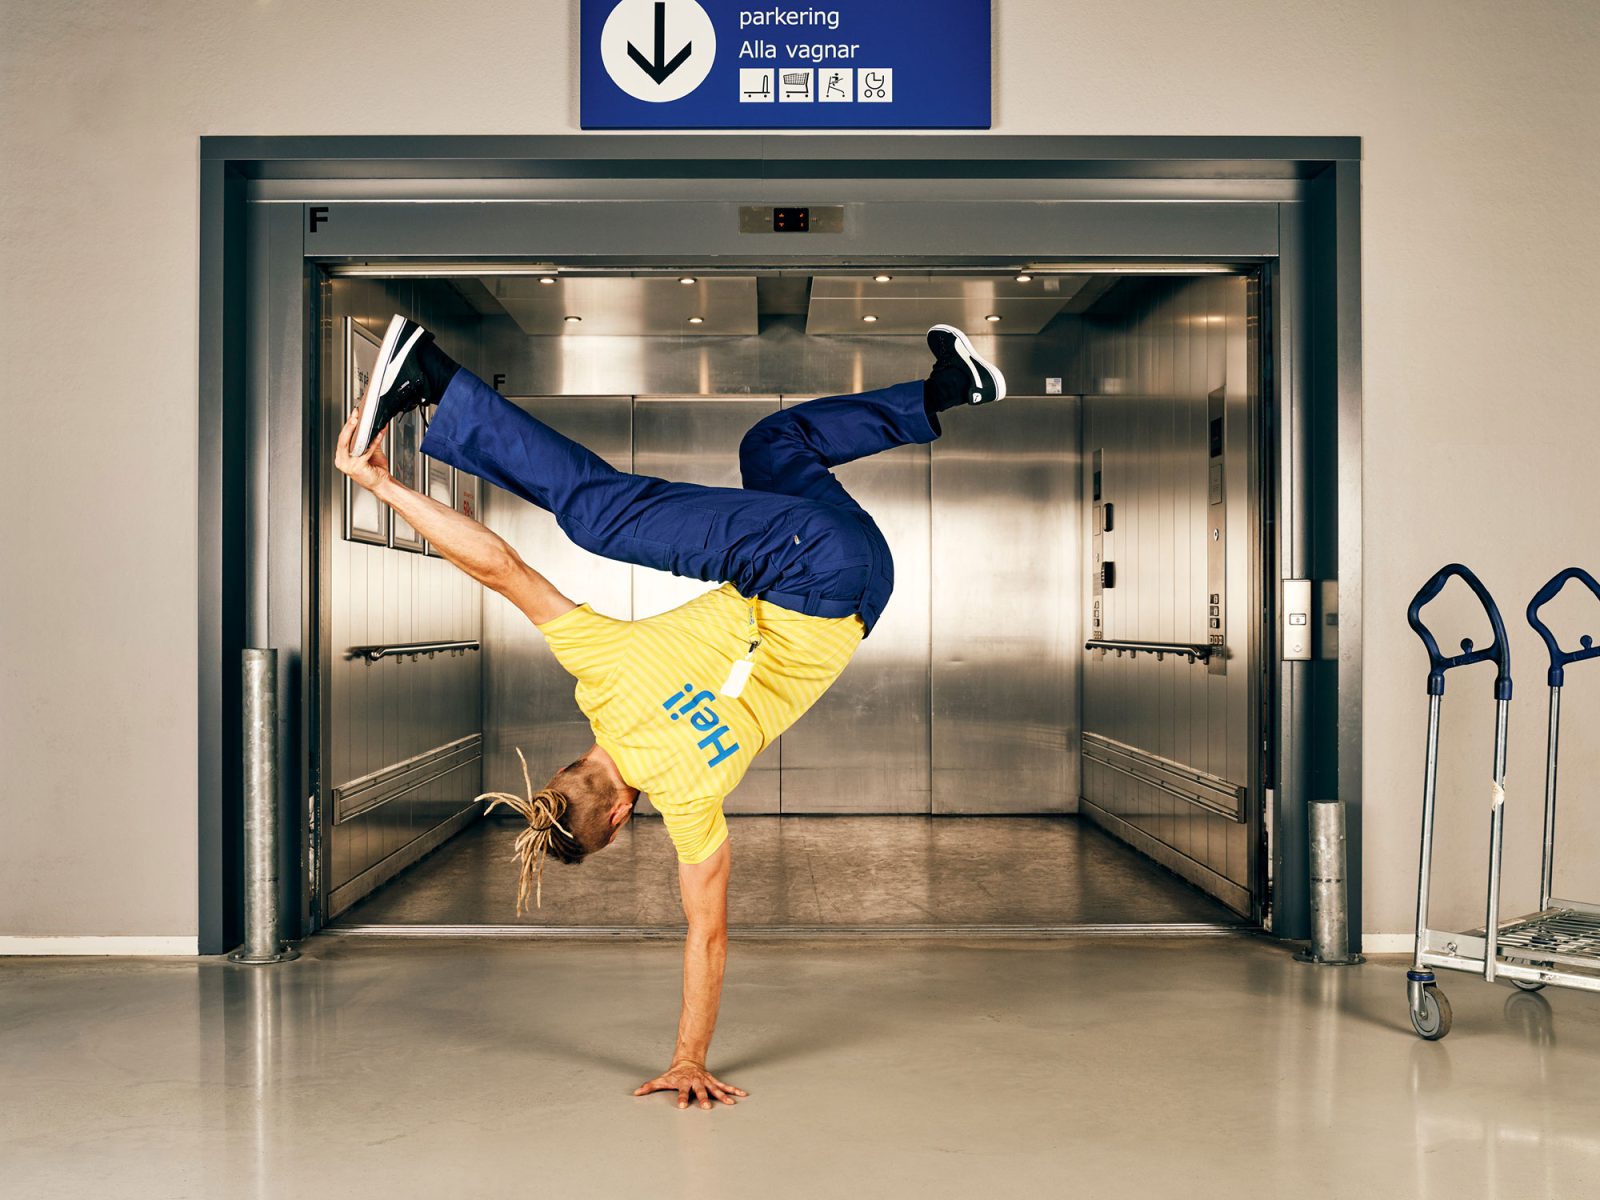 Young blond man in IKEA blue and yellow work clothes does a break dance move in front of an IKEA store elevator.